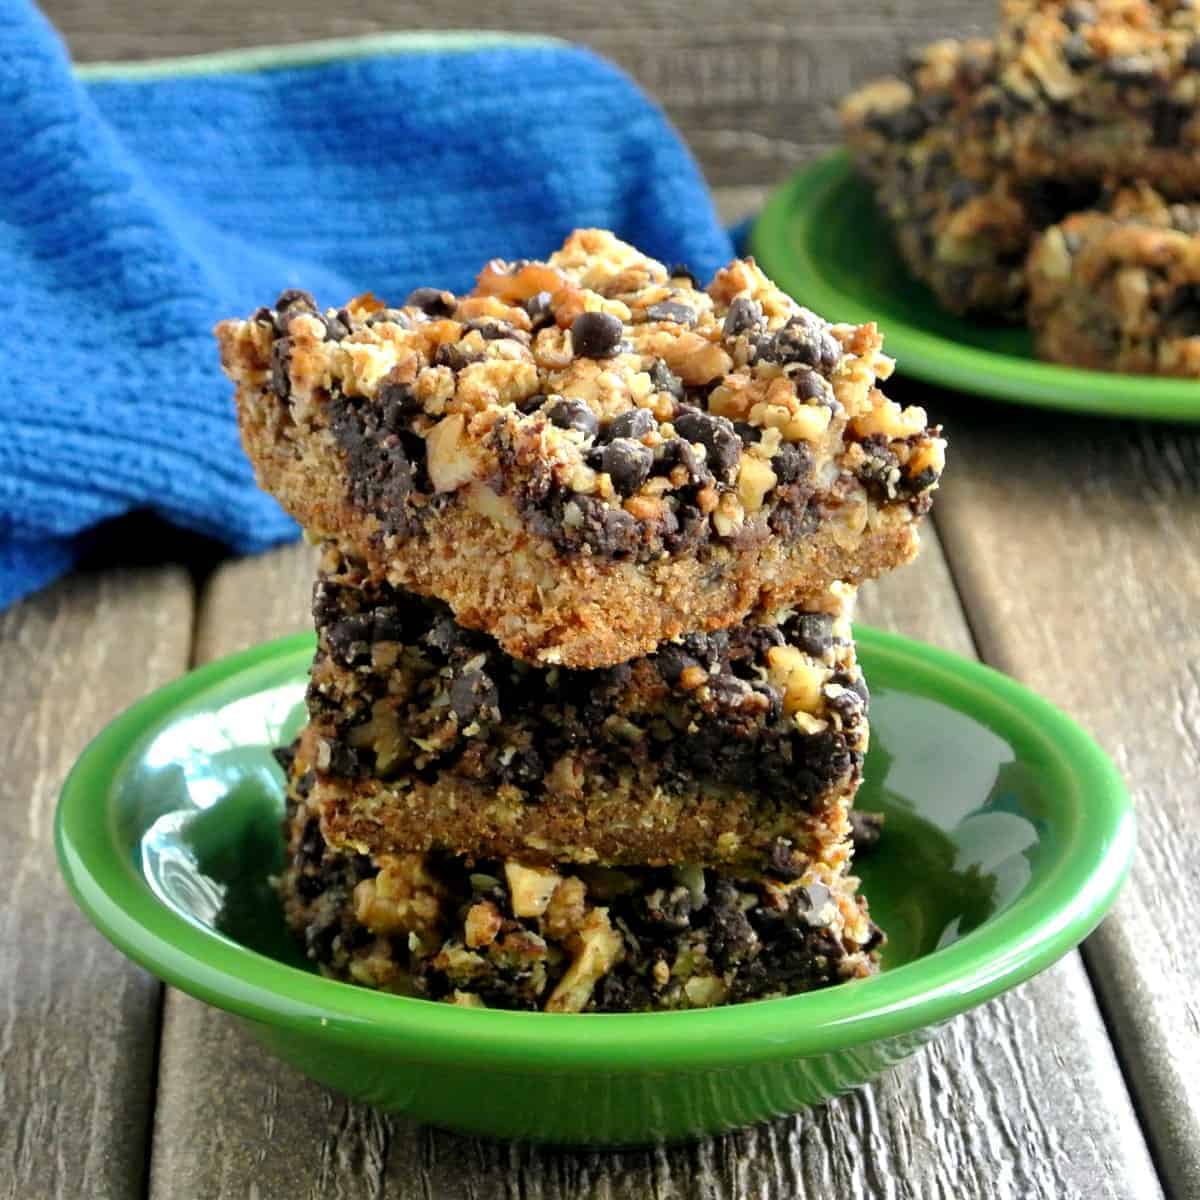 Chocolate Chip bars stacked on top of each other on a wooden picnic table.